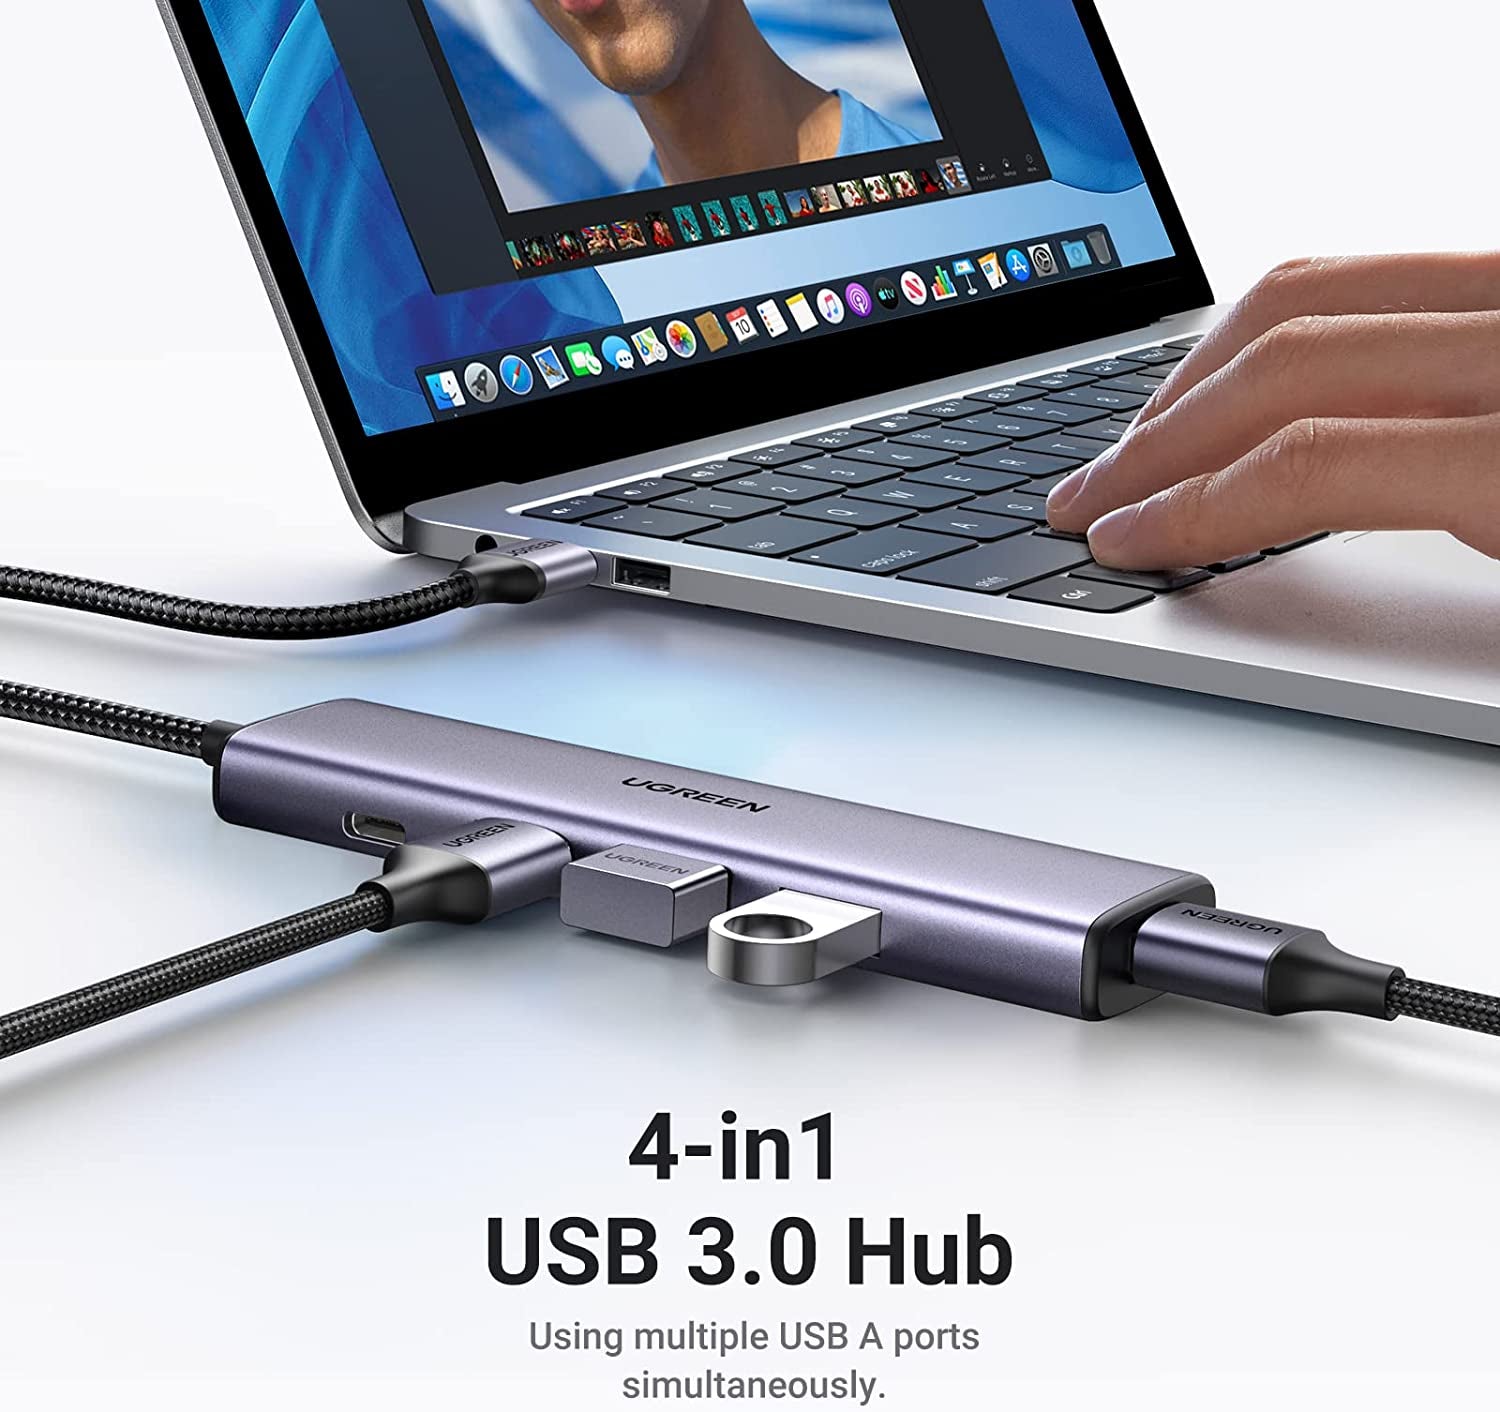 Aluminum Ultra-Slim USB 3.0 Hub - 4 Port, with Charging Support and Multiport Adapter for Macbook Pro, iMac Pro, Surface Pro, Laptop, PC, Flash Drive, and Mobile HDD